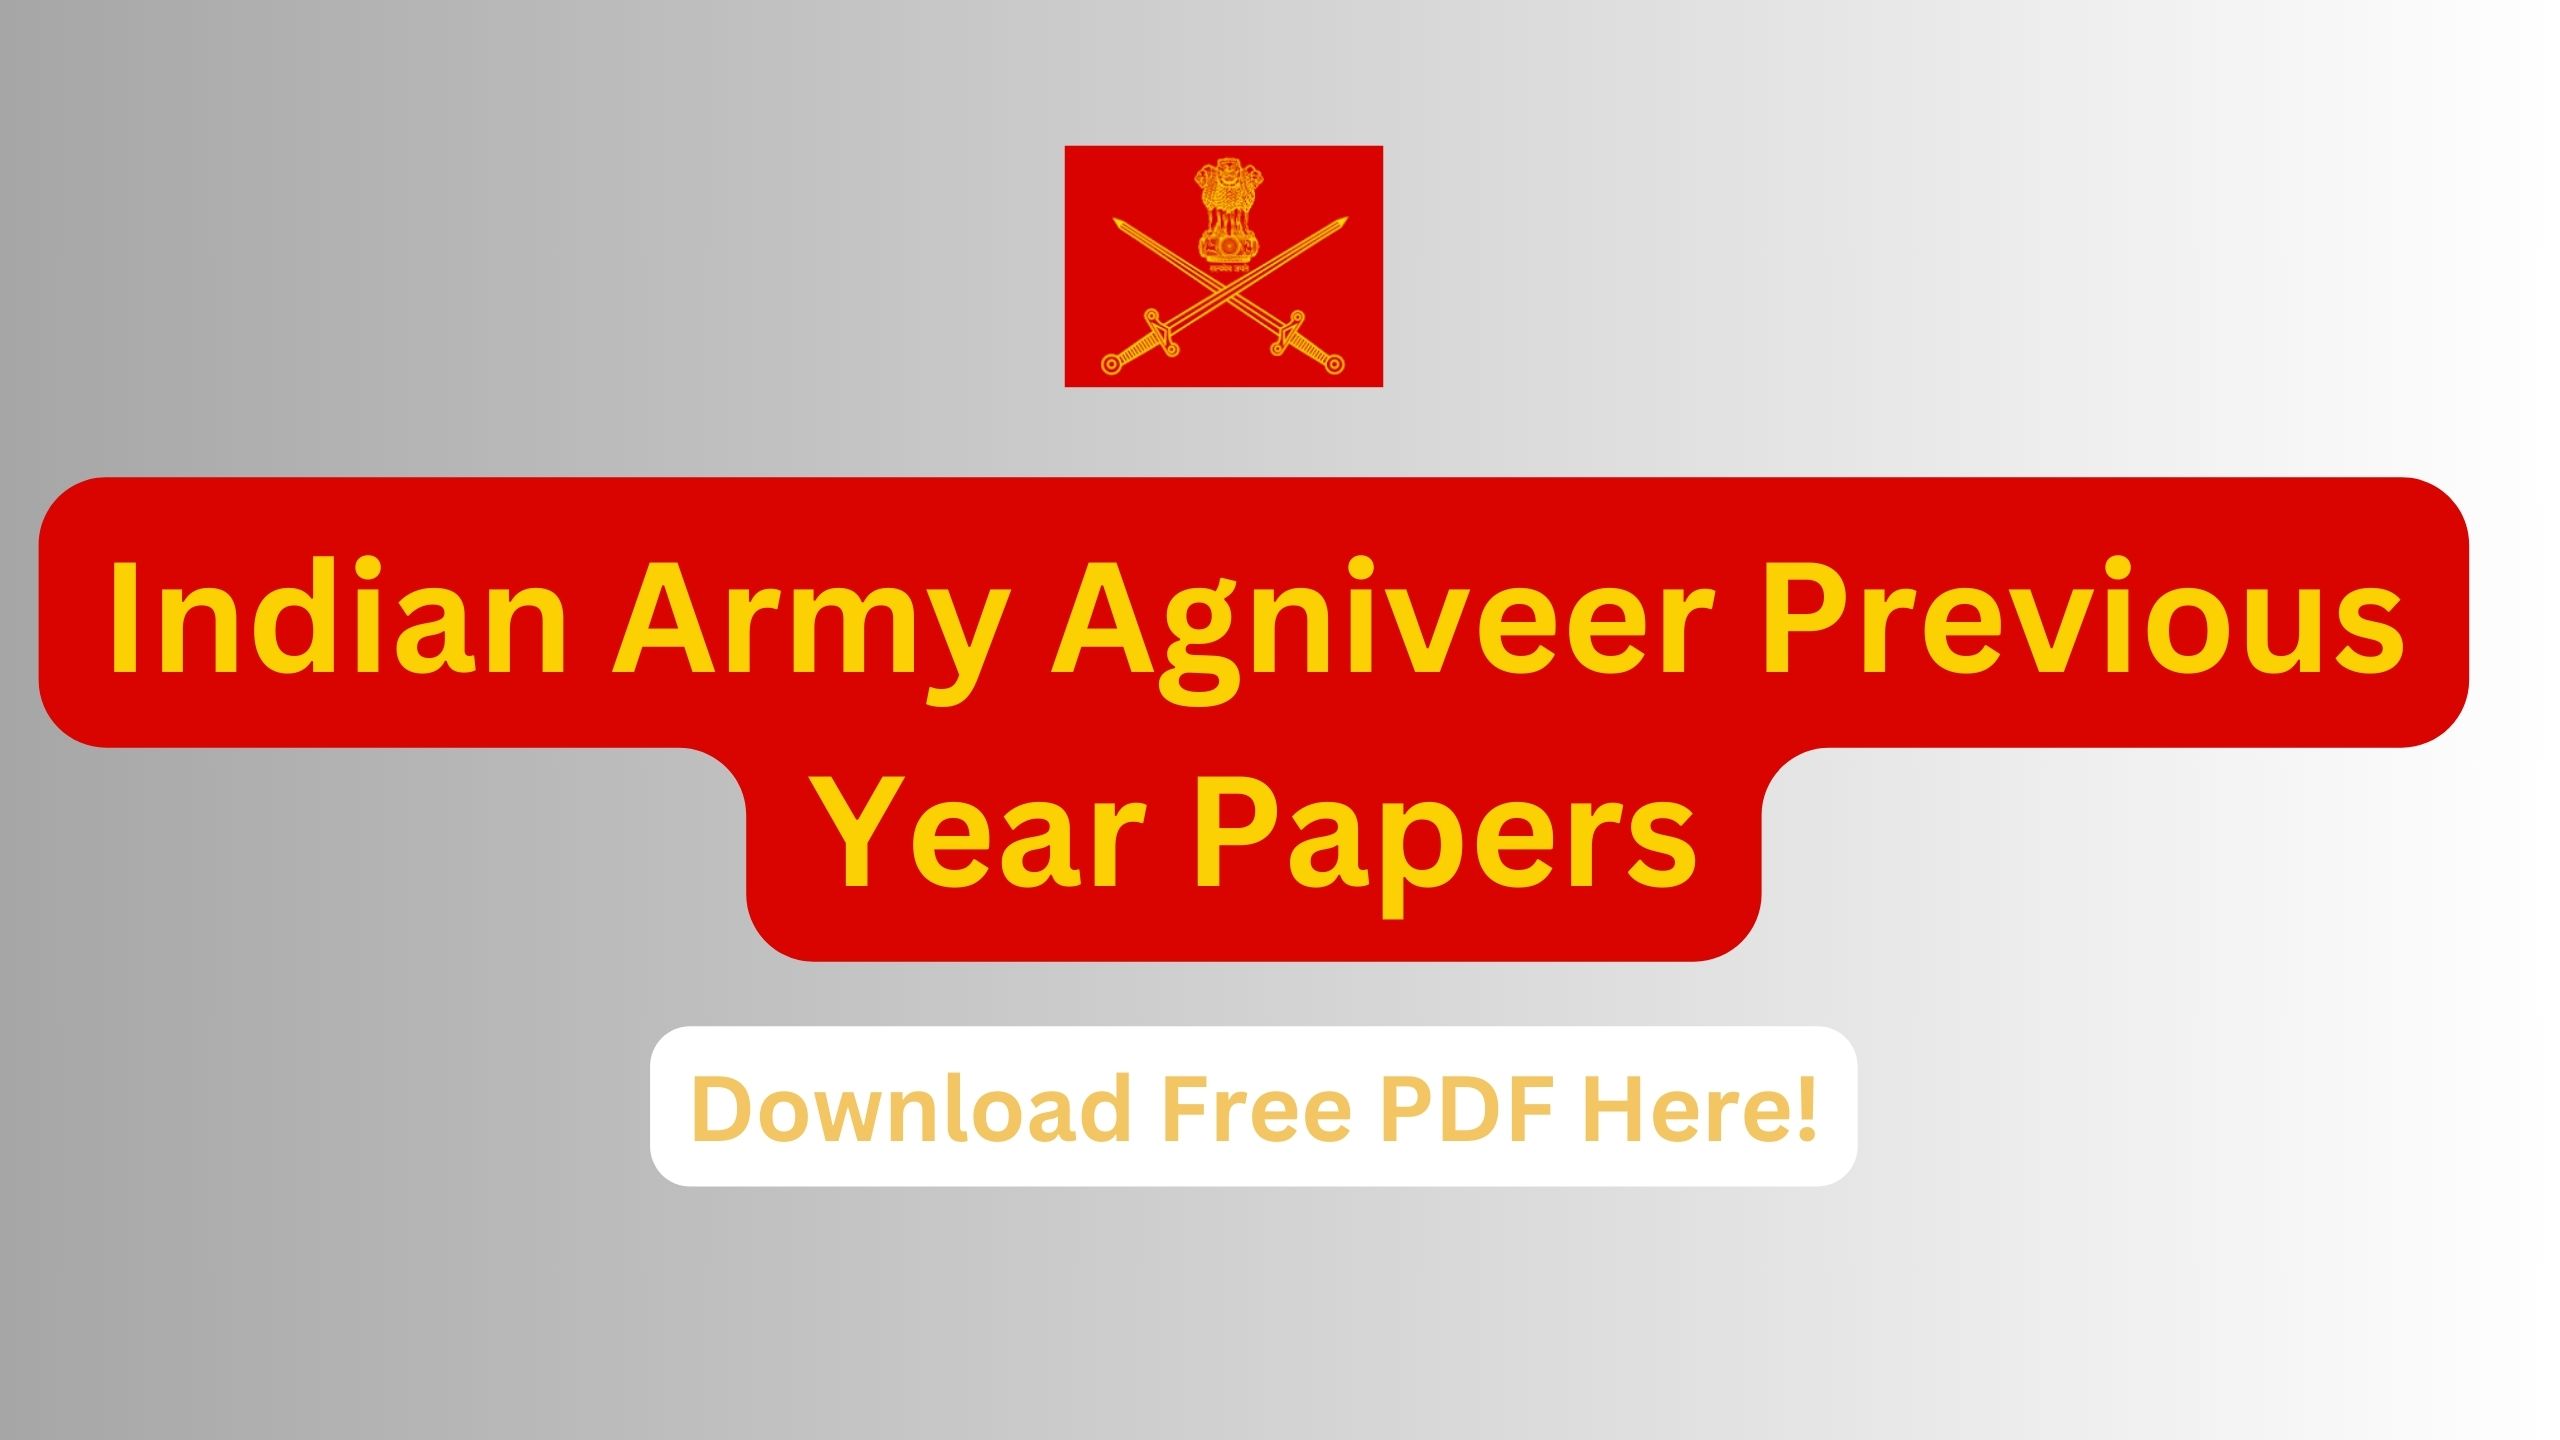 Indian Army Agniveer Previous Year Papers, Download Old Papers!